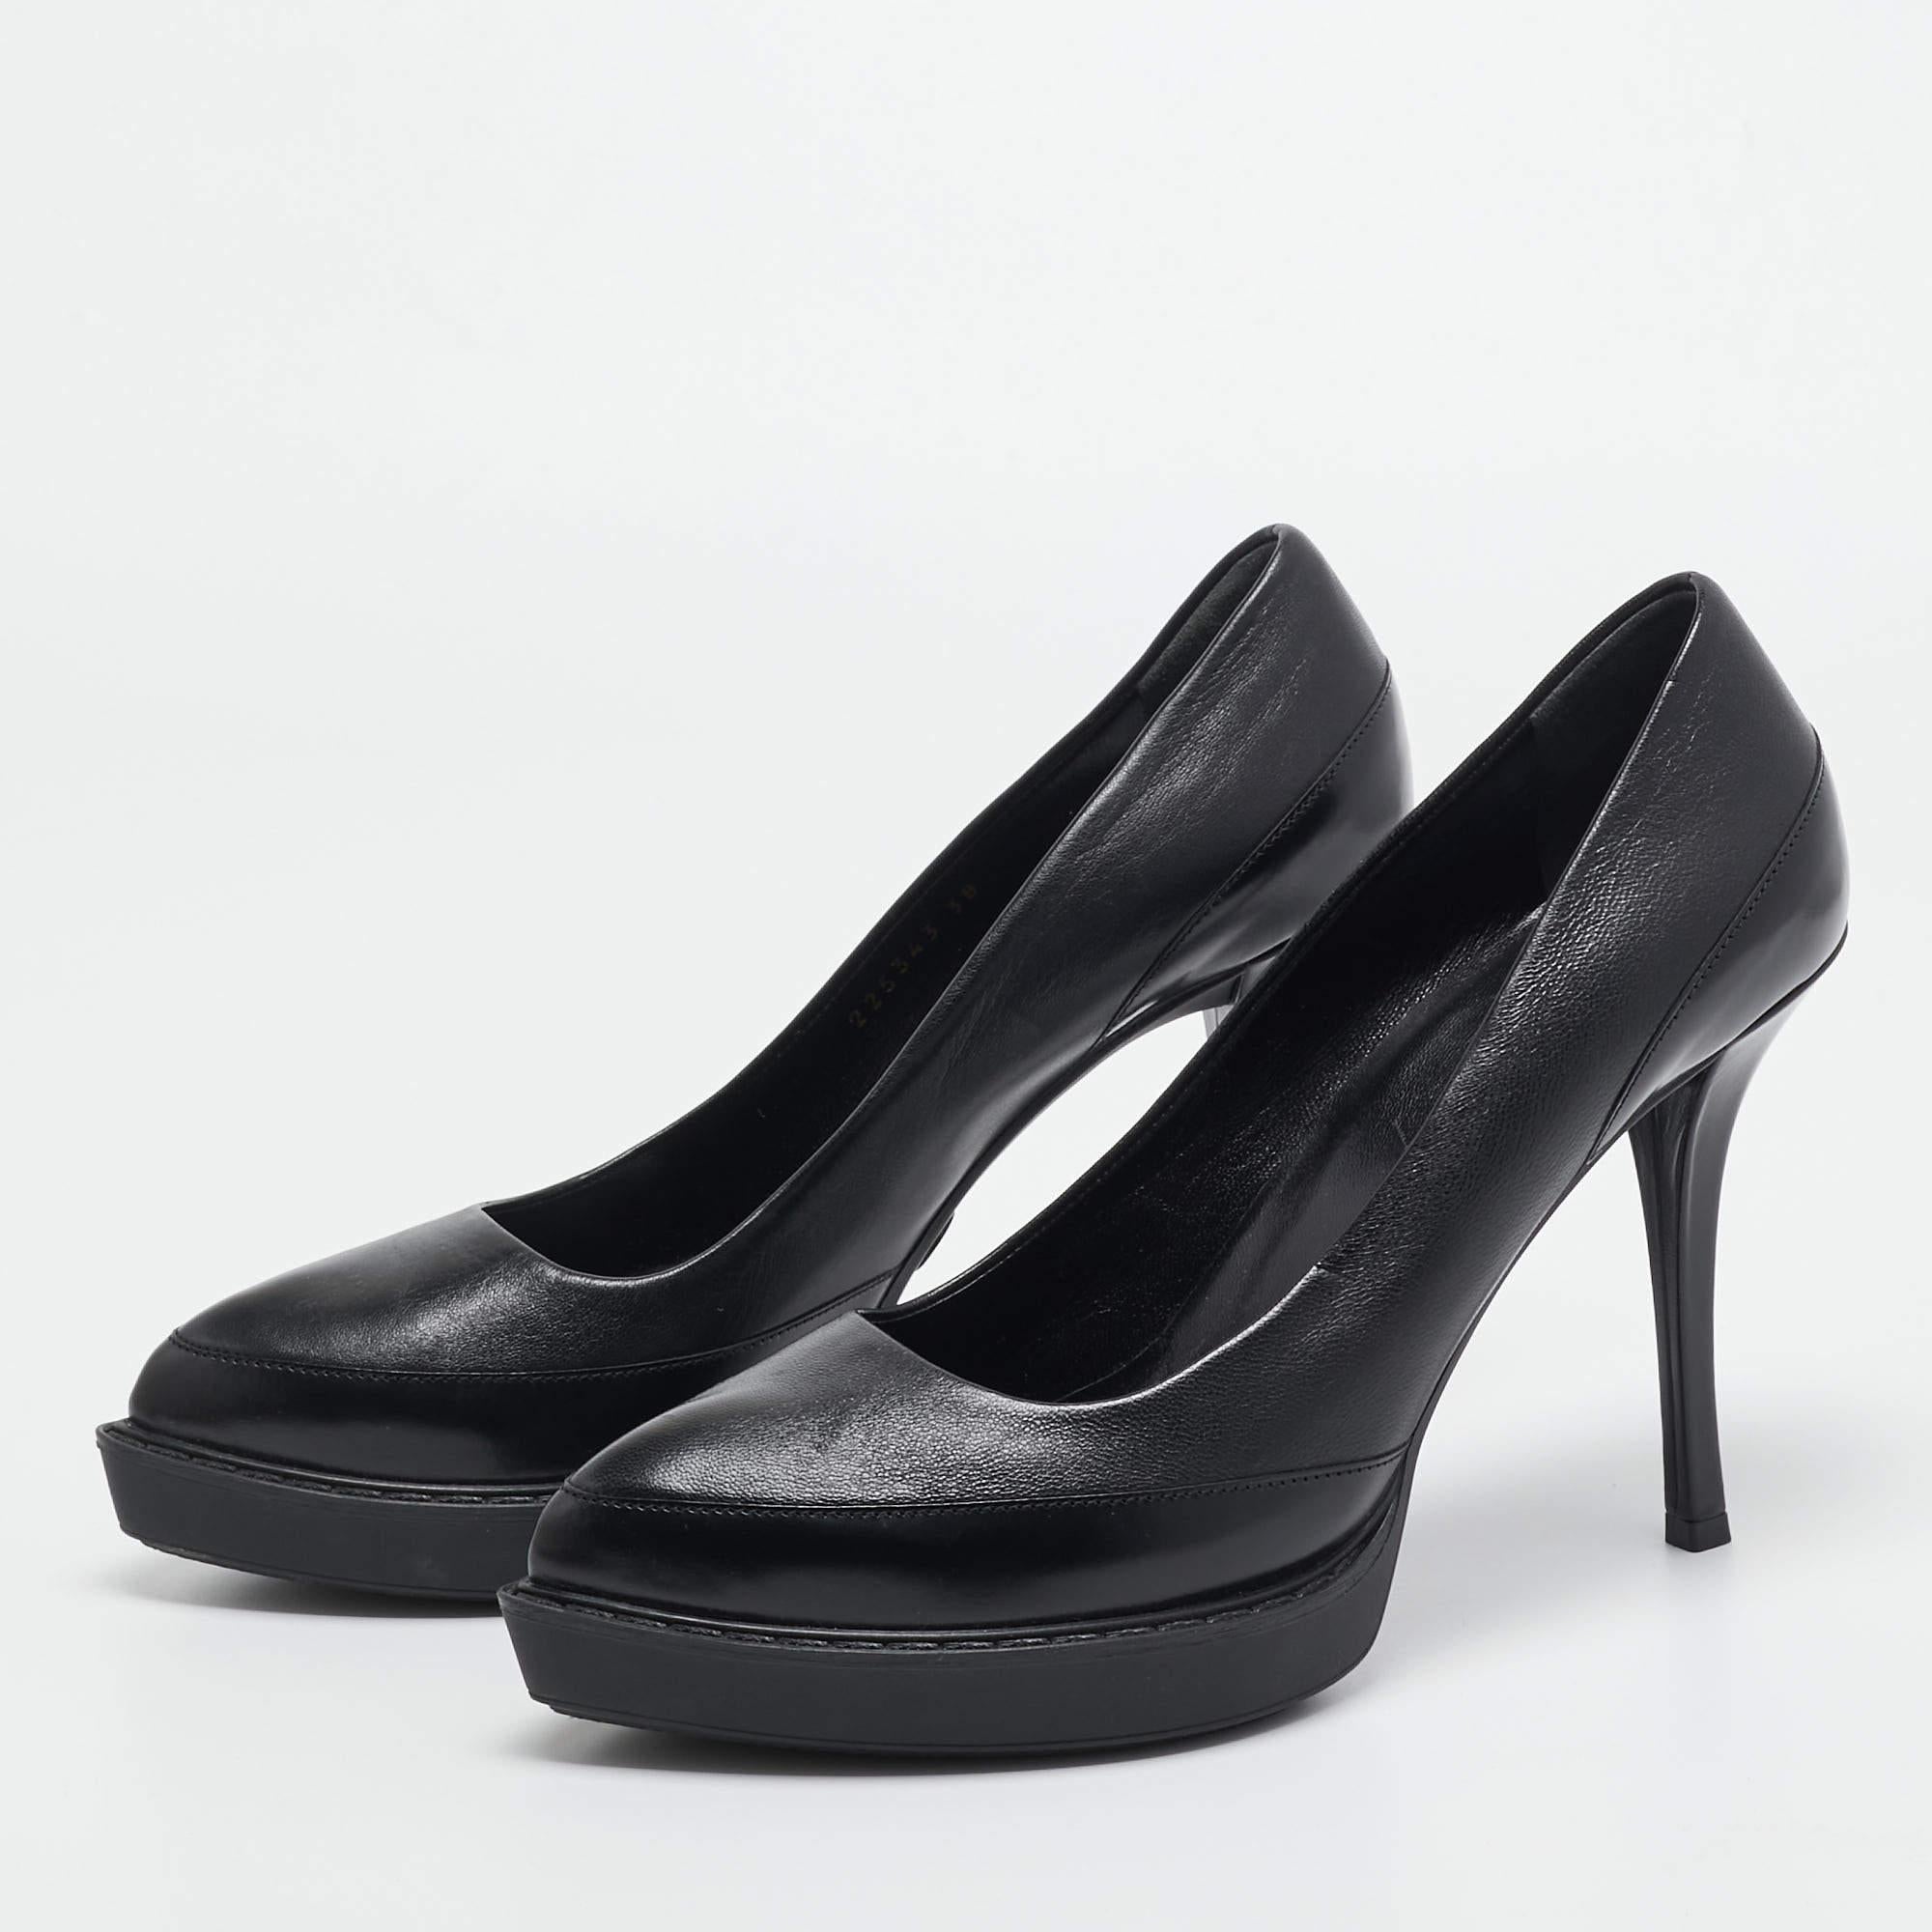 Gucci Black Leather Pointed Toe Pumps Size 38 For Sale 4